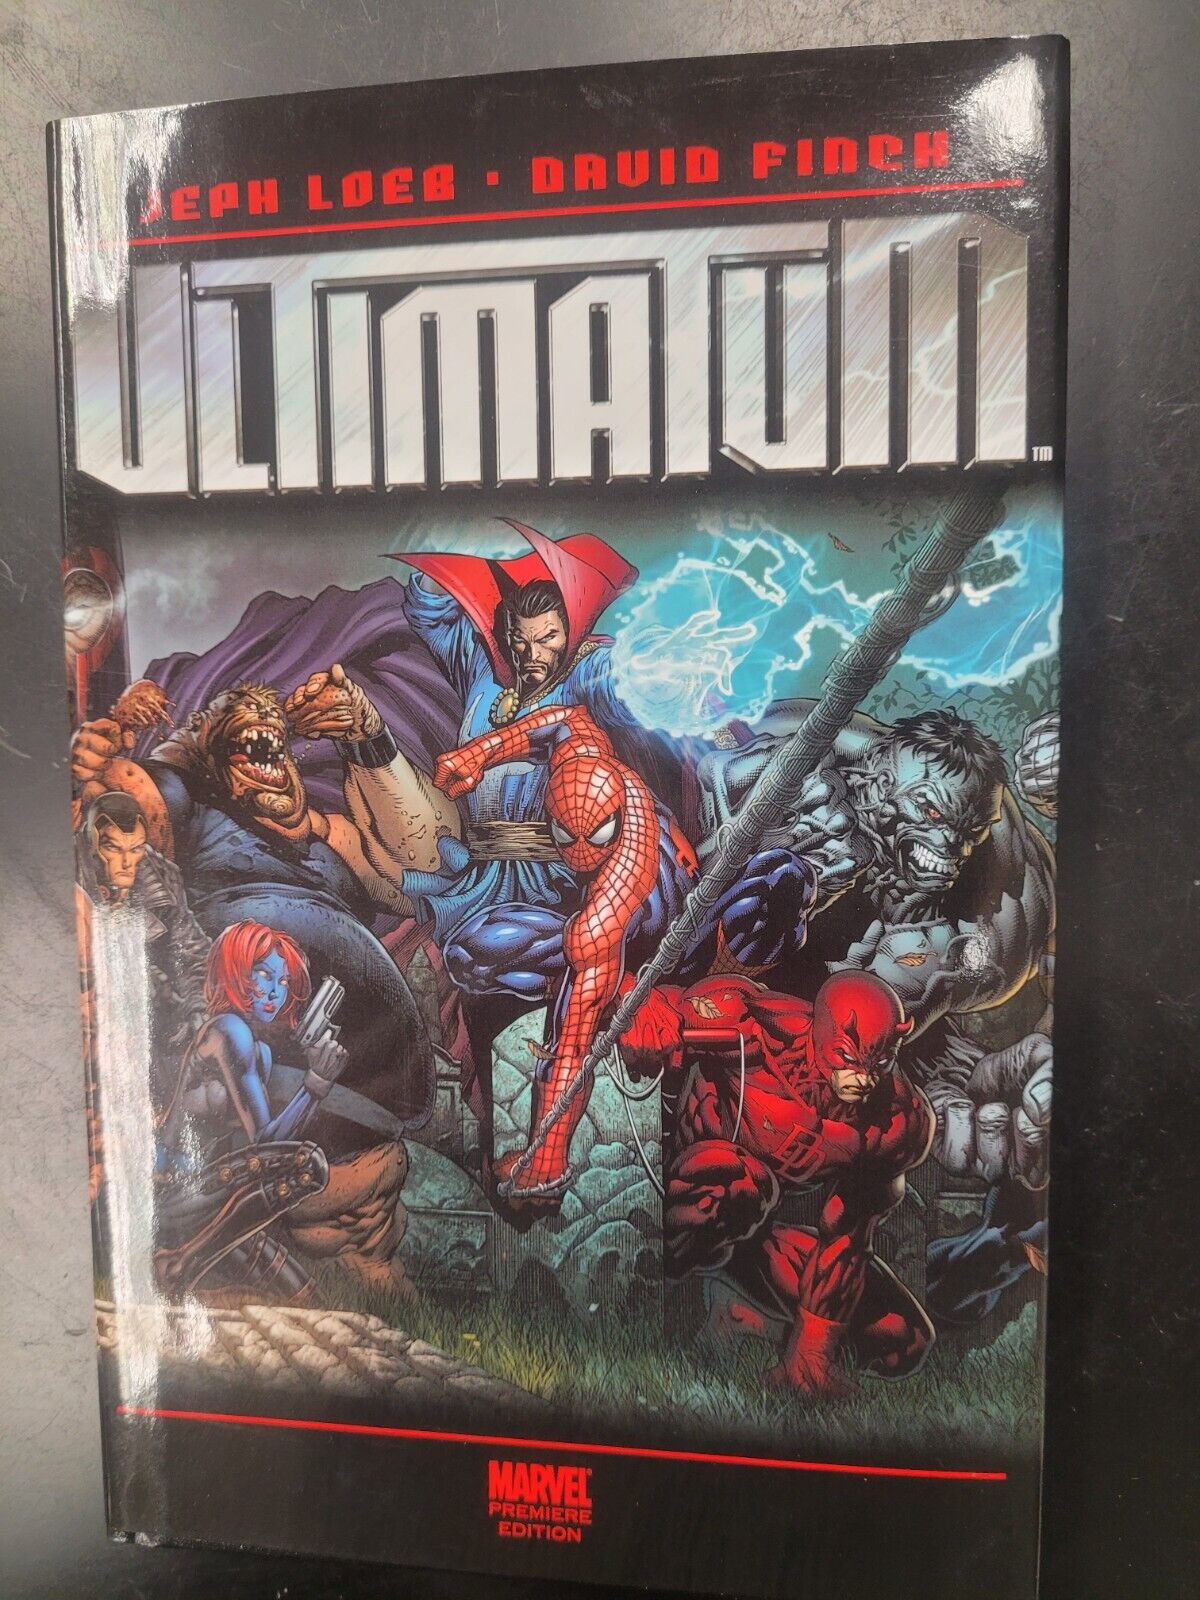 Ultimatum (Marvel Hardcover Premiere Ed.) by Jeph Loeb and David Finch 2009